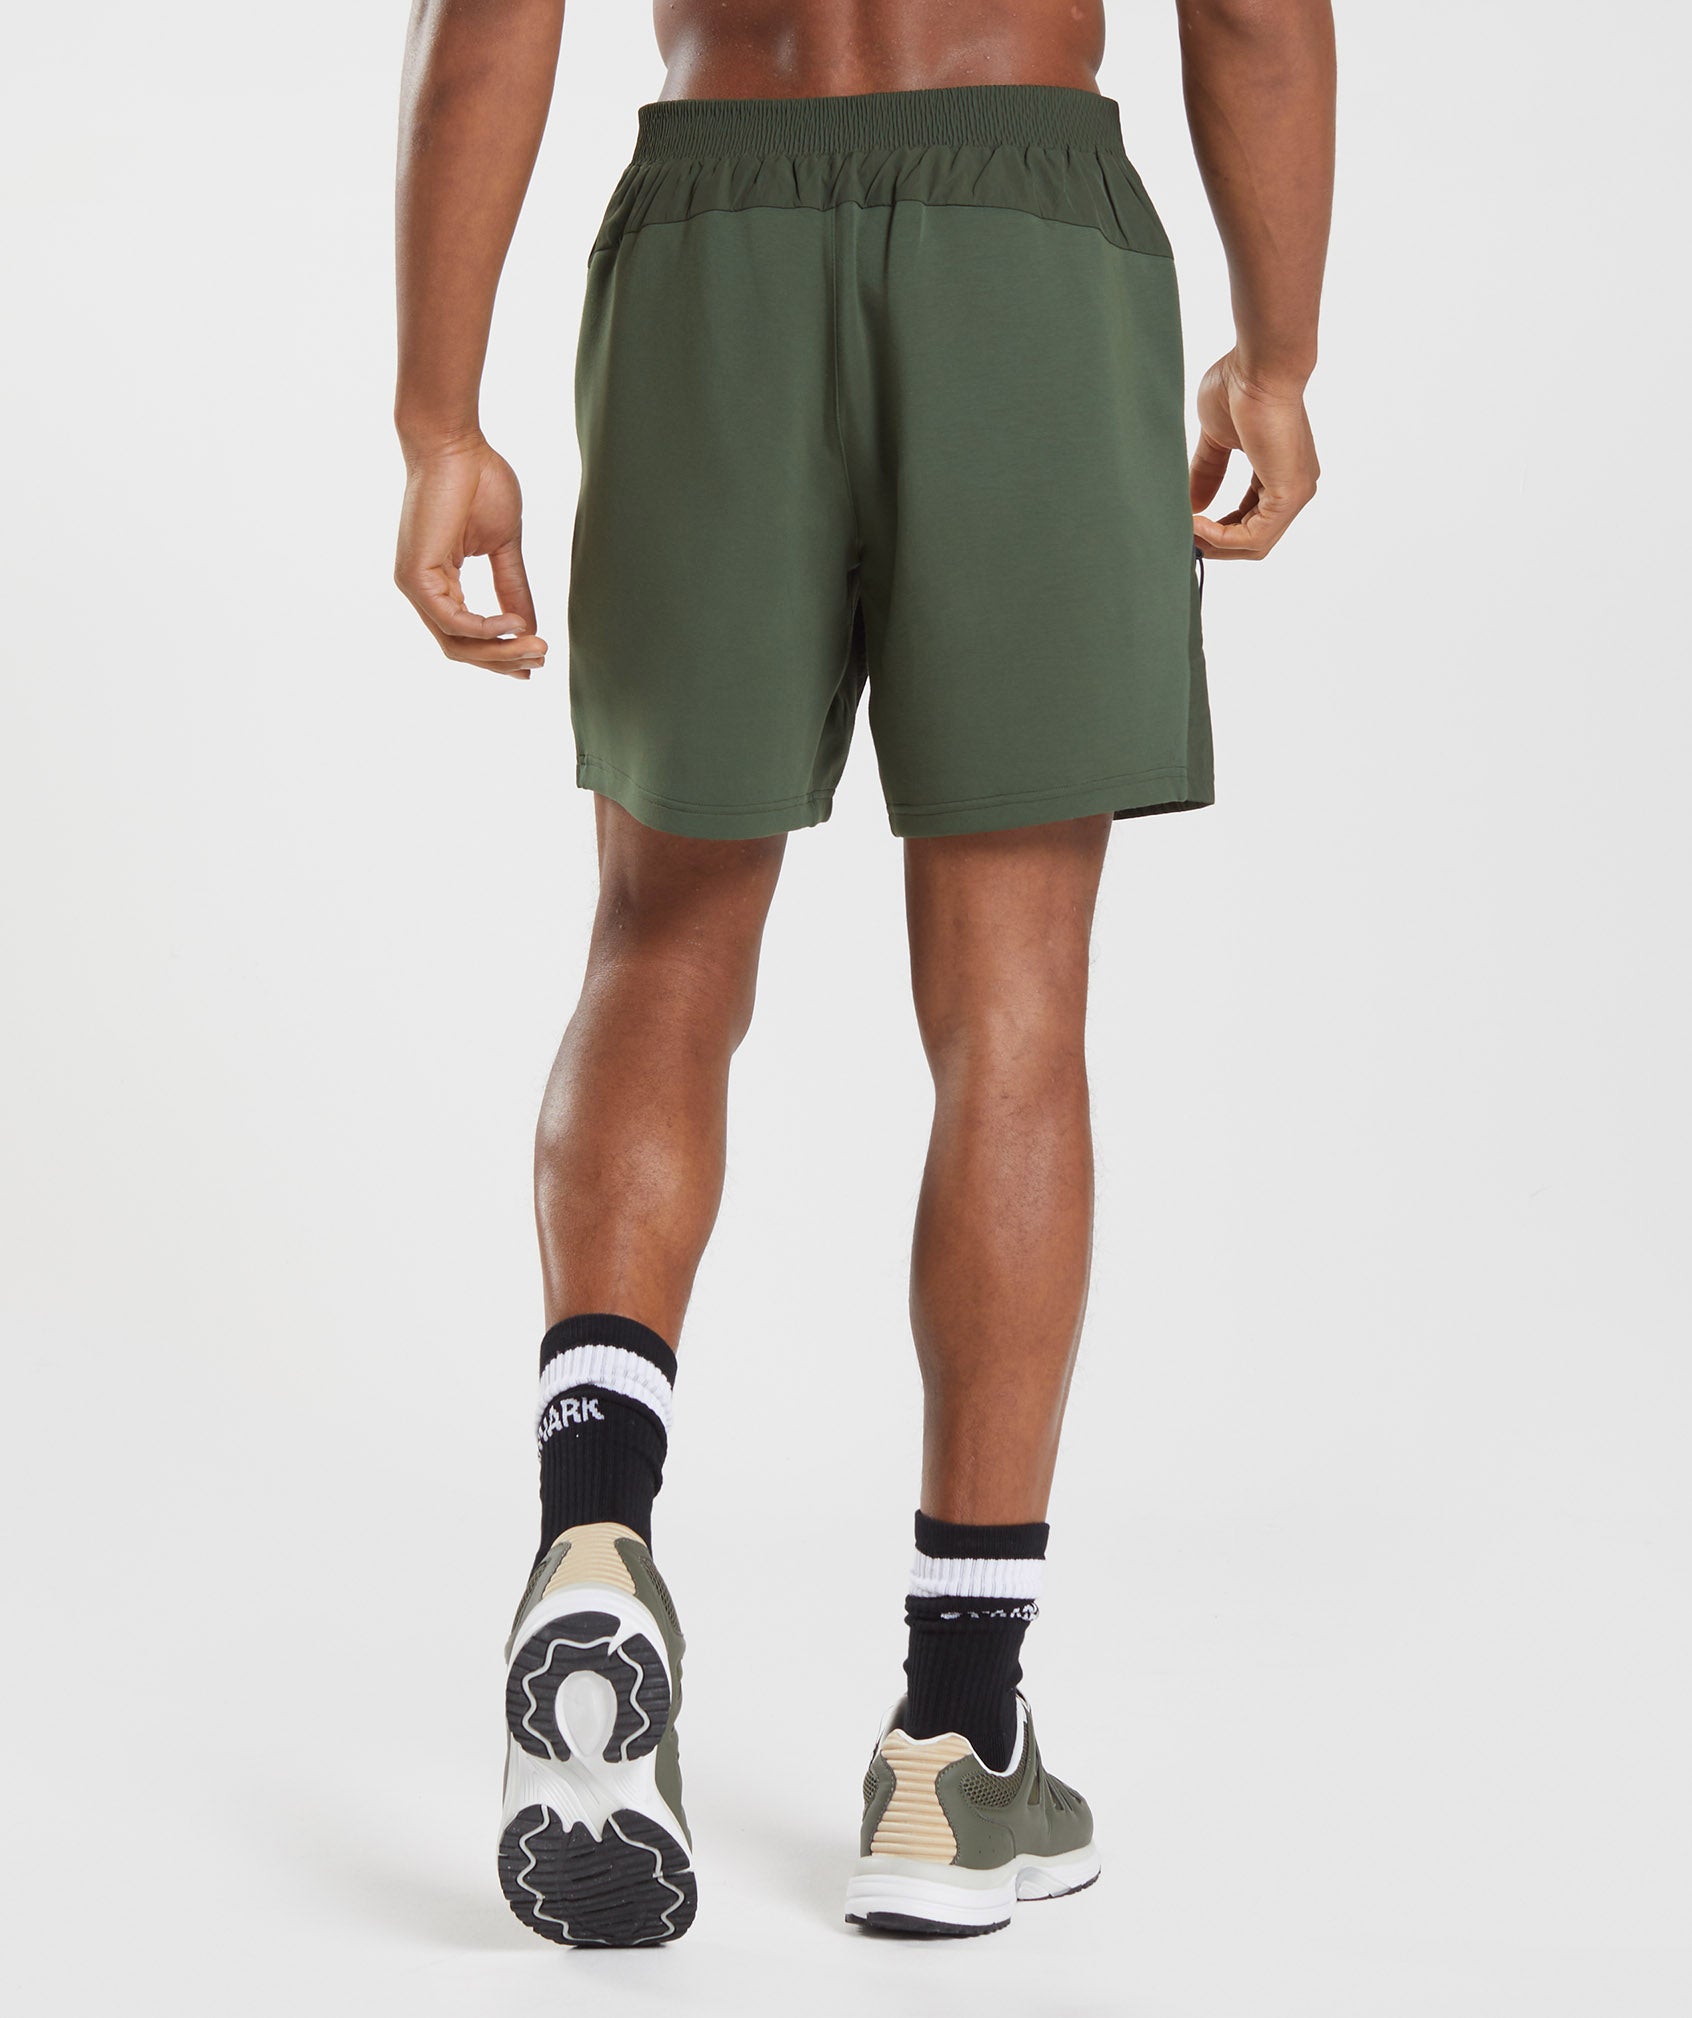 Retake Woven 7" Shorts in Moss Olive - view 2